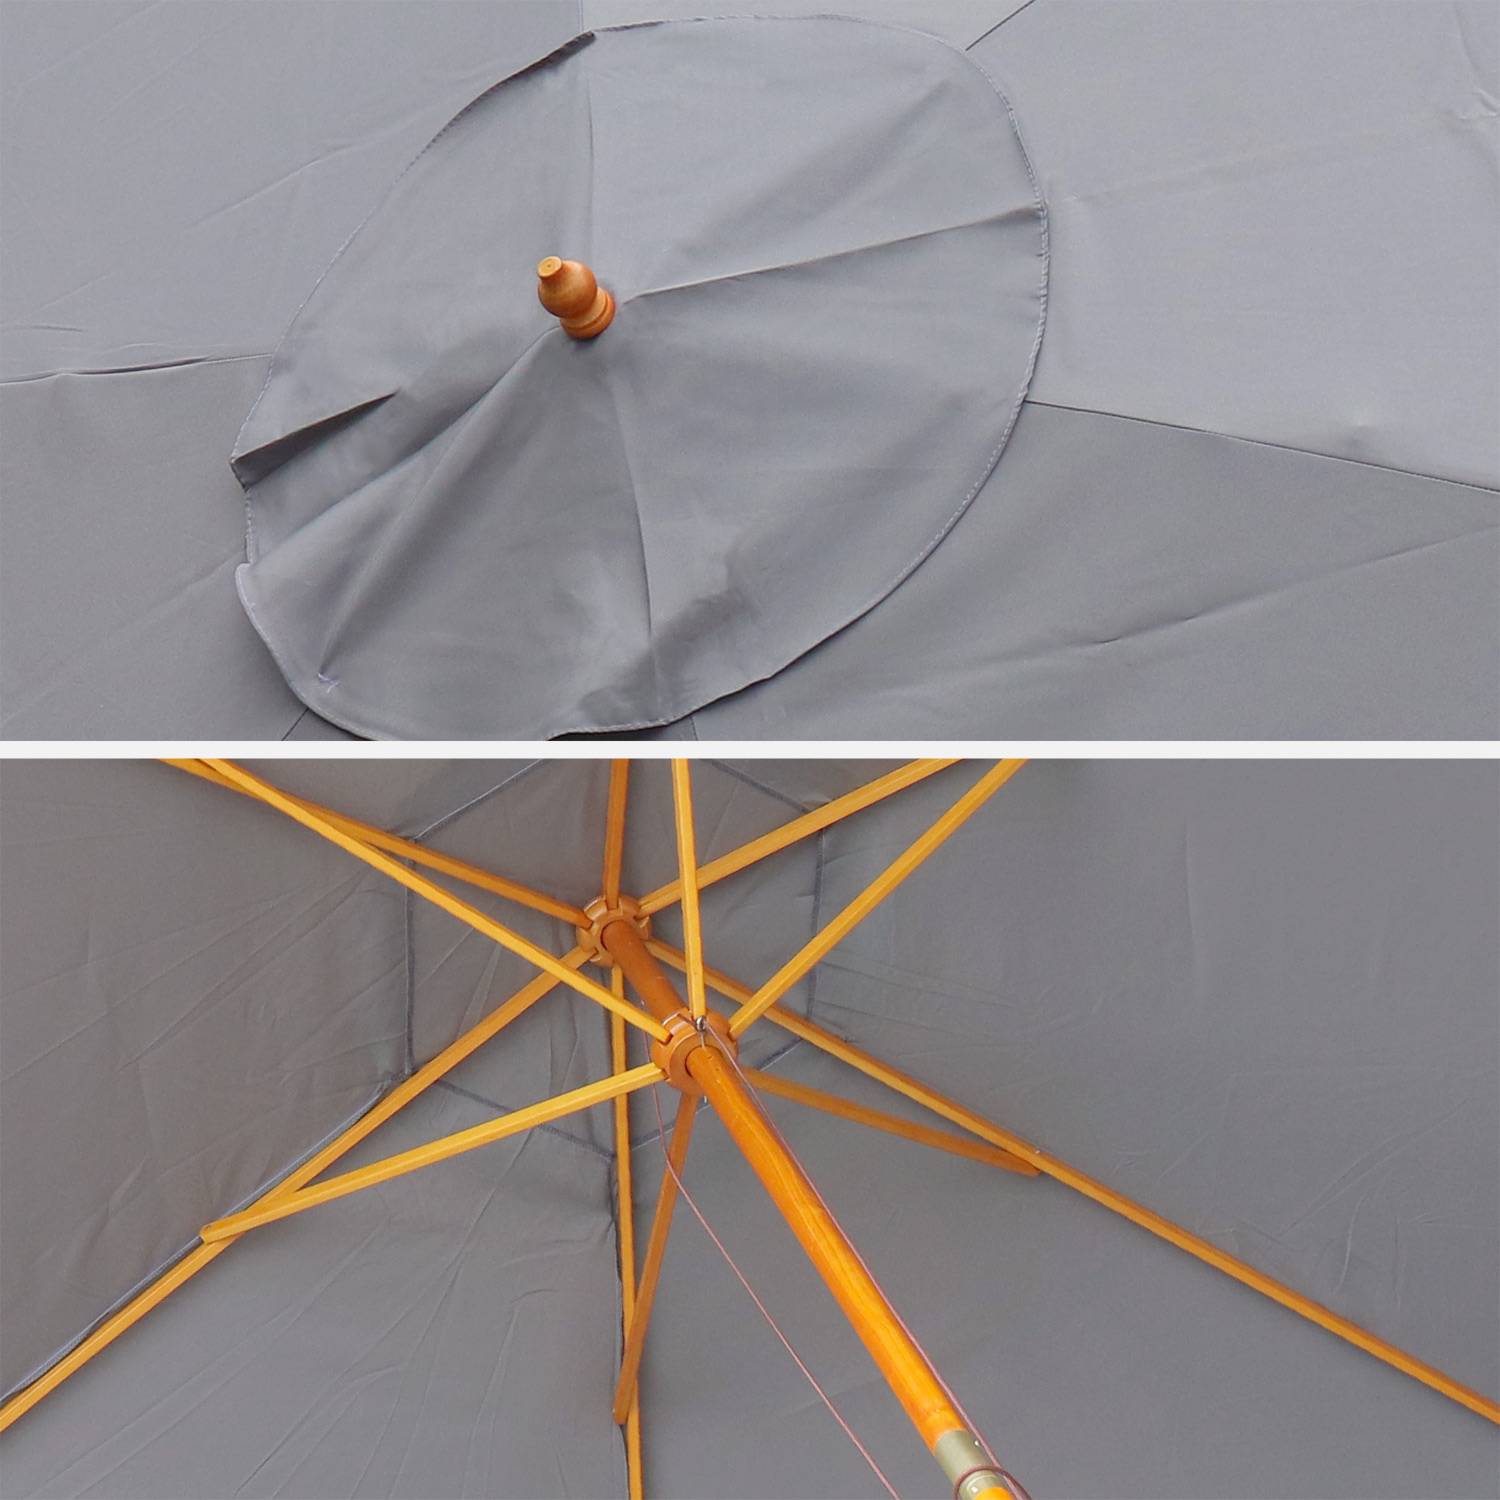 Round wooden parasol Ø300cm with straight pole -  adjustable aluminium central mast in wood and crank handle opening - Cabourg - Grey Photo4